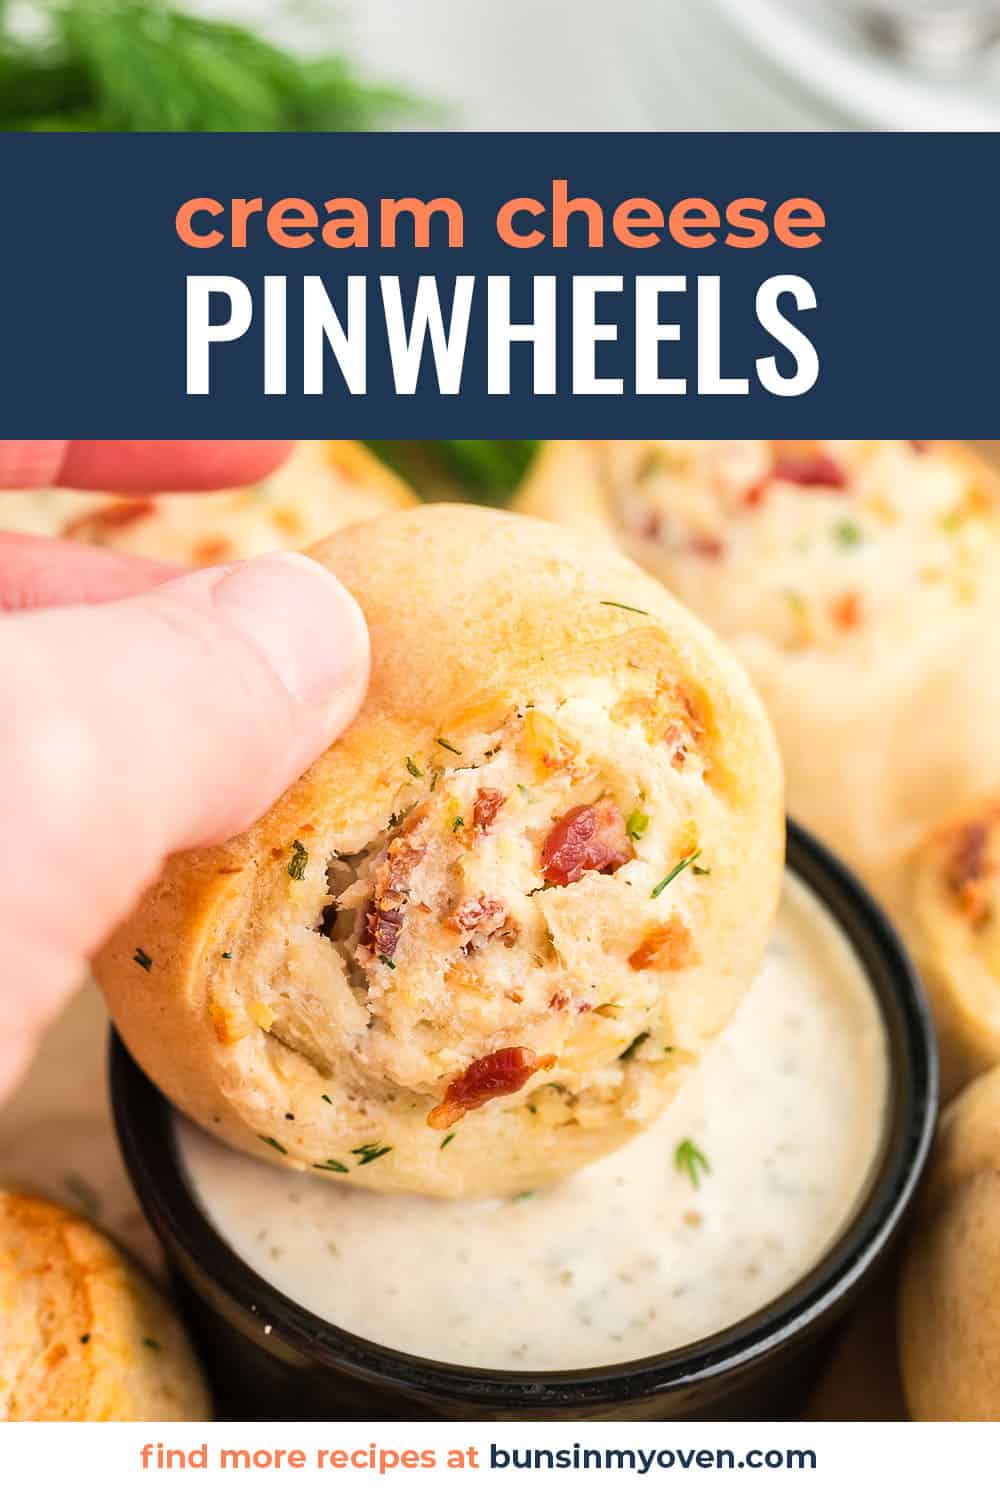 Cream cheese pinwheel being dunked in ranch.